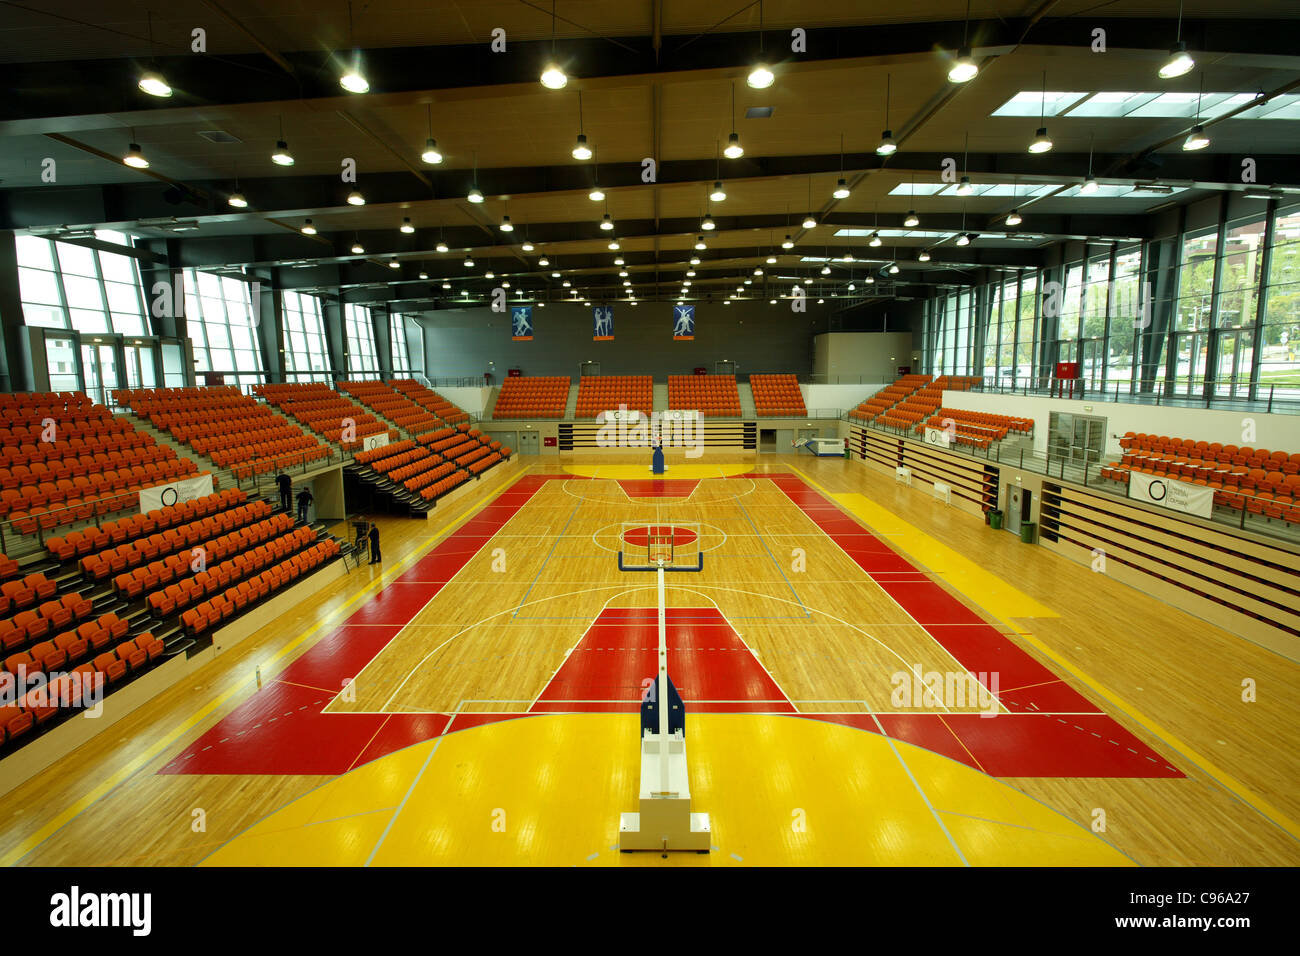 Basketball court at indoor sports arena in Coimbra, Portugal Stock Photo